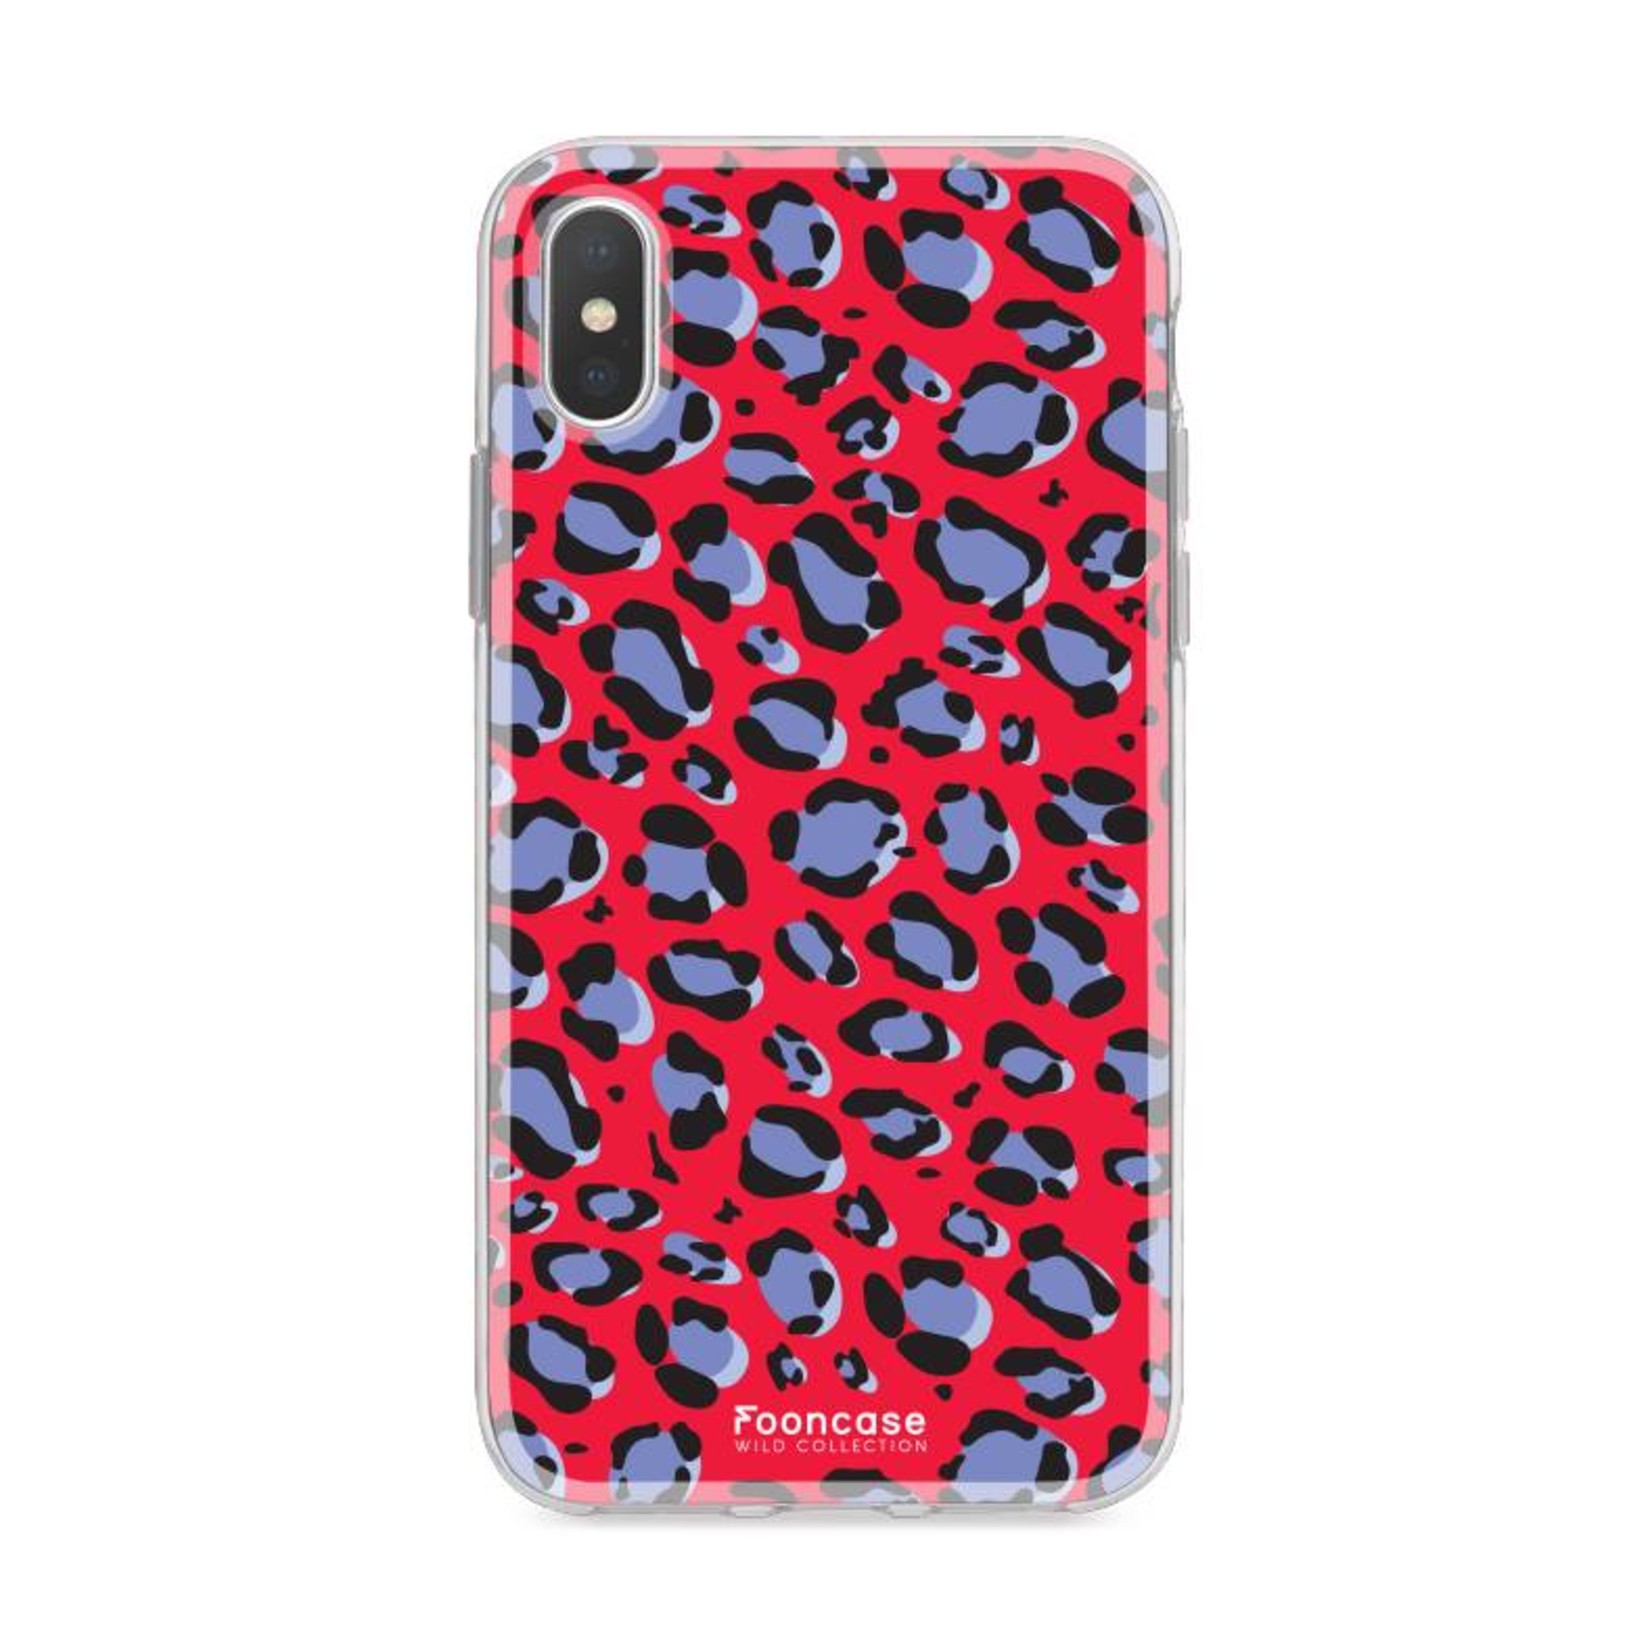 FOONCASE Iphone XS Max - WILD COLLECTION / Red